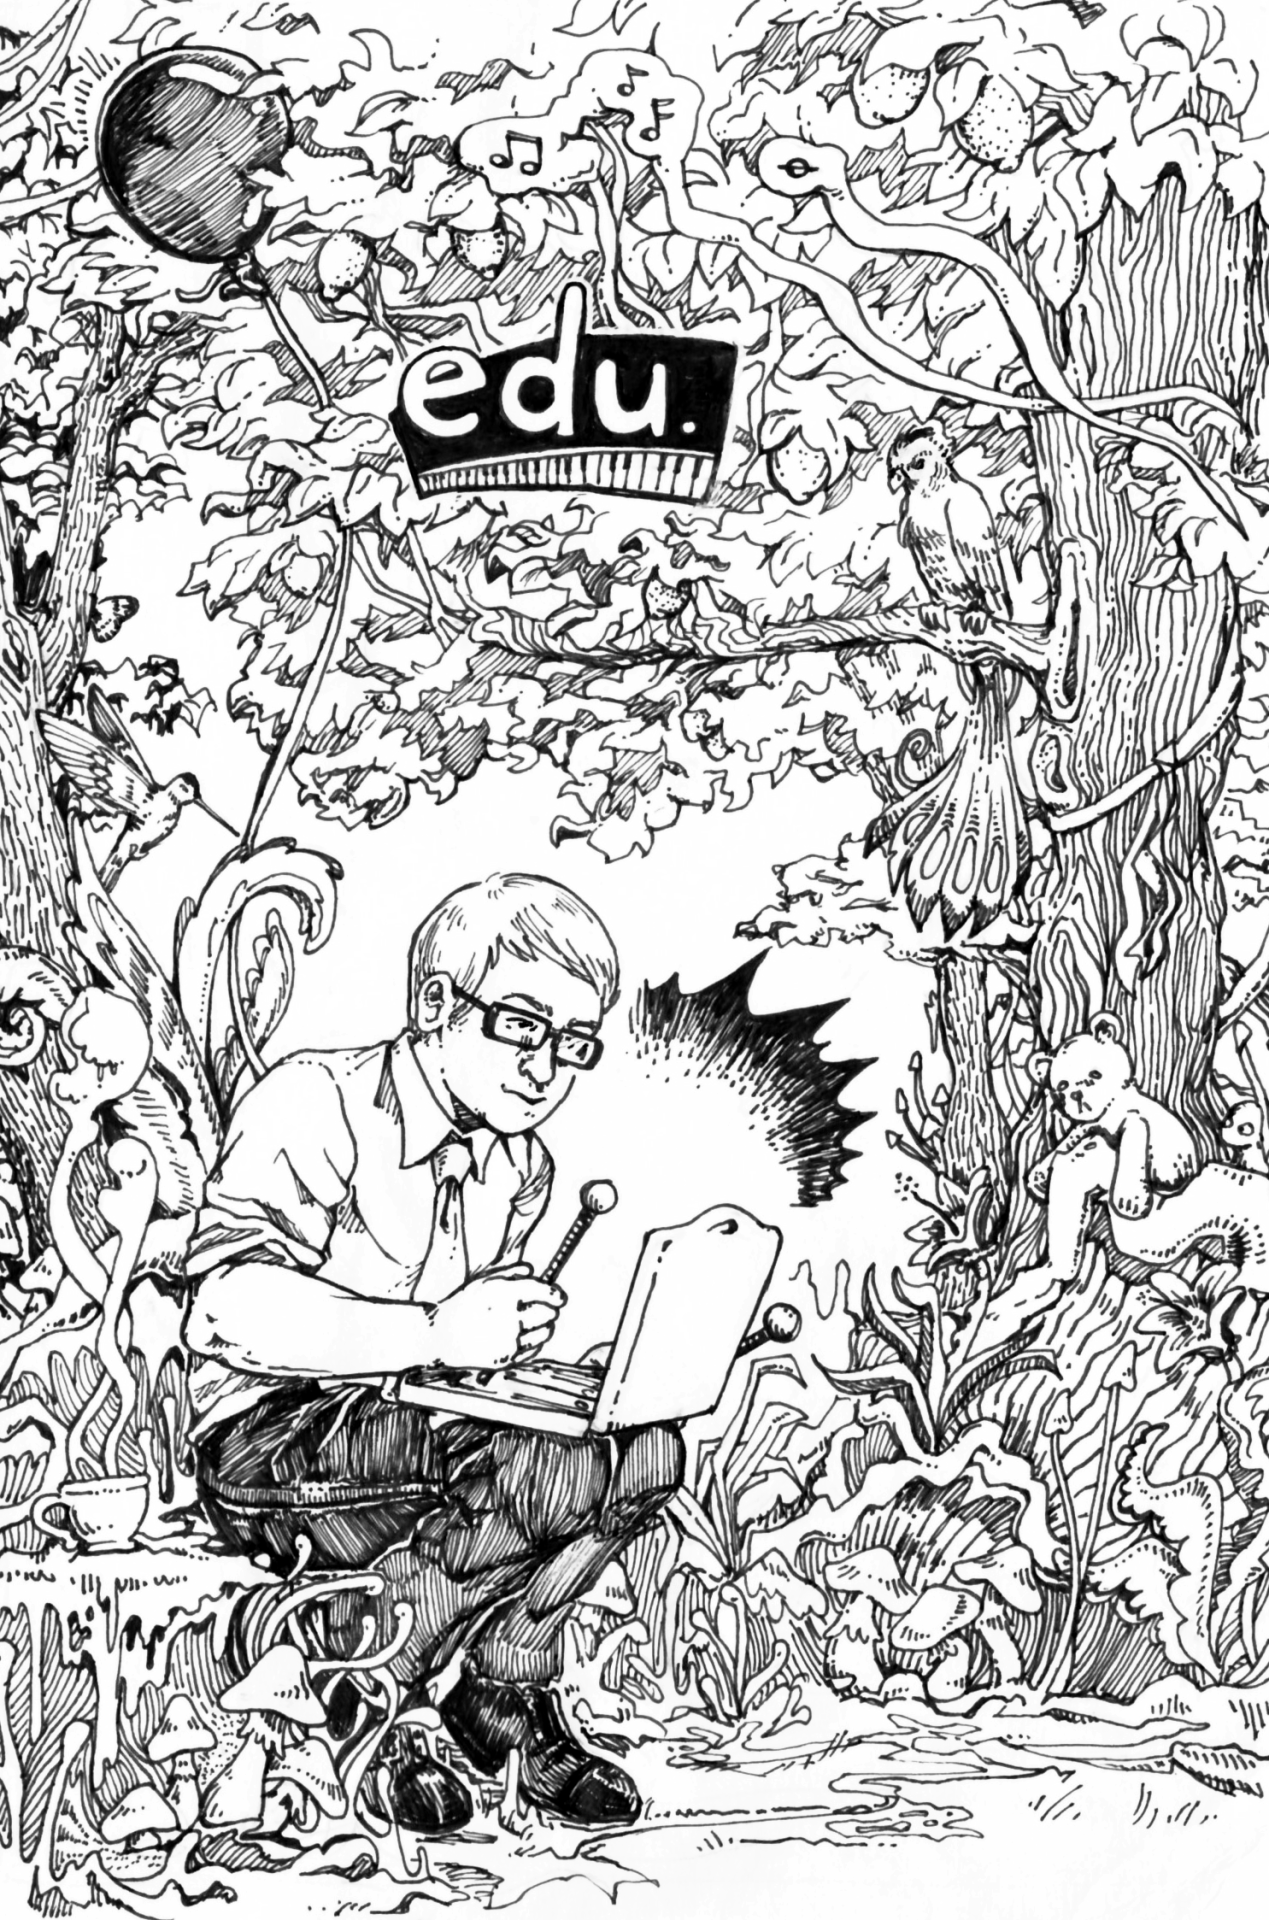 Black and white line drawing of a man in glasses sitting in a dense woodland setting. In his lap is a xylophone.